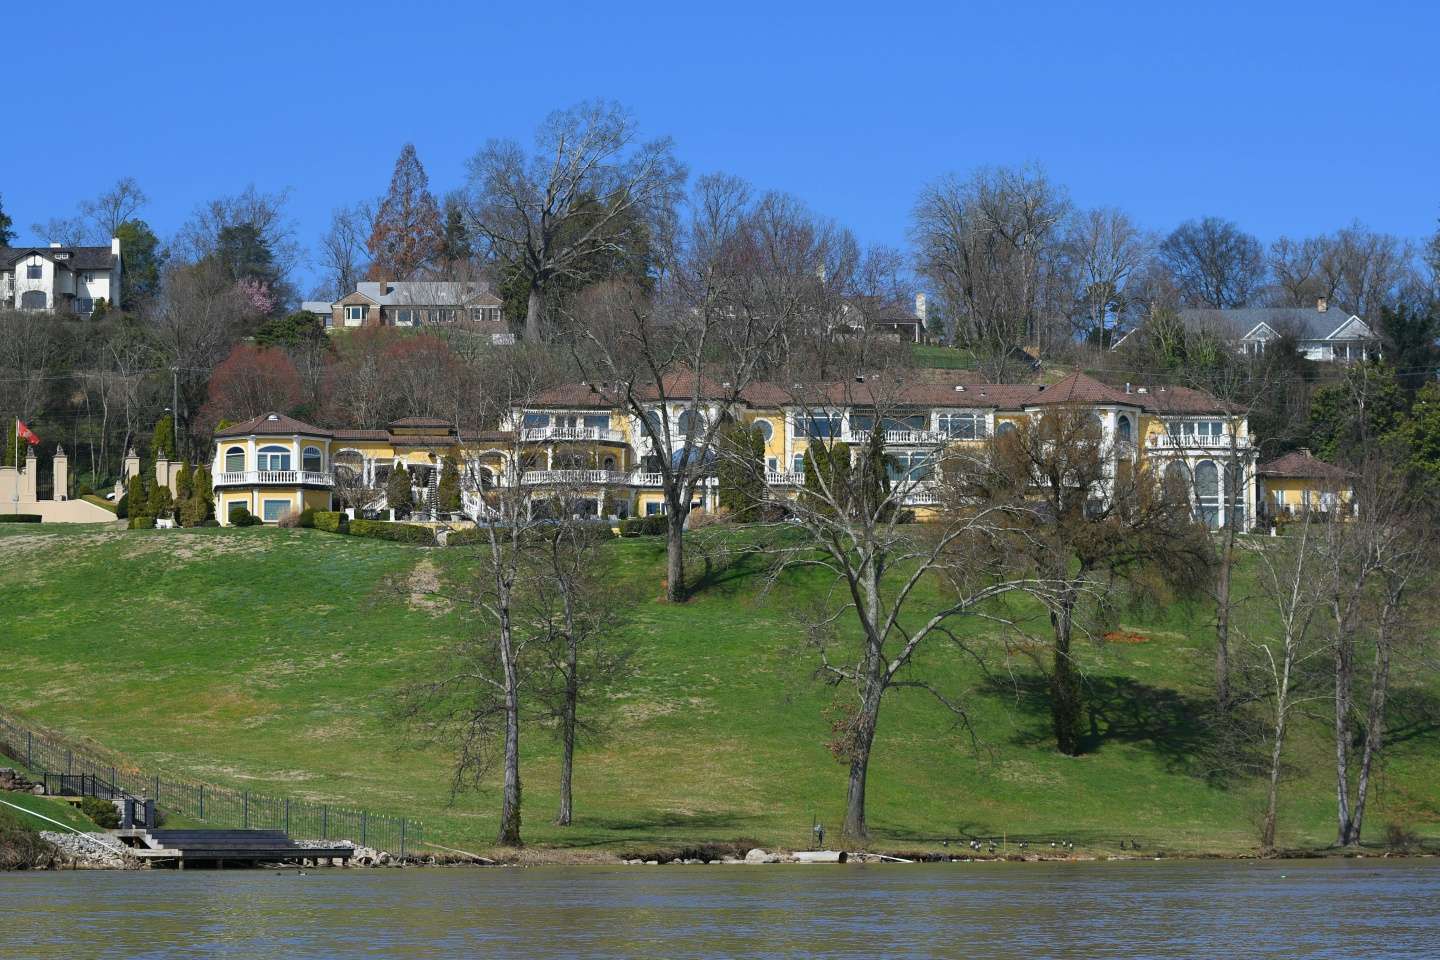 Moving on and closer to downtown Knoxville. Behold Villa Collina, at 40,000 square feet the largest home in the entire state, not to mention on the lake. Itâs up for sale, too, for $15 million. Perfect place to throw a Bassmaster LIVE watch party. 